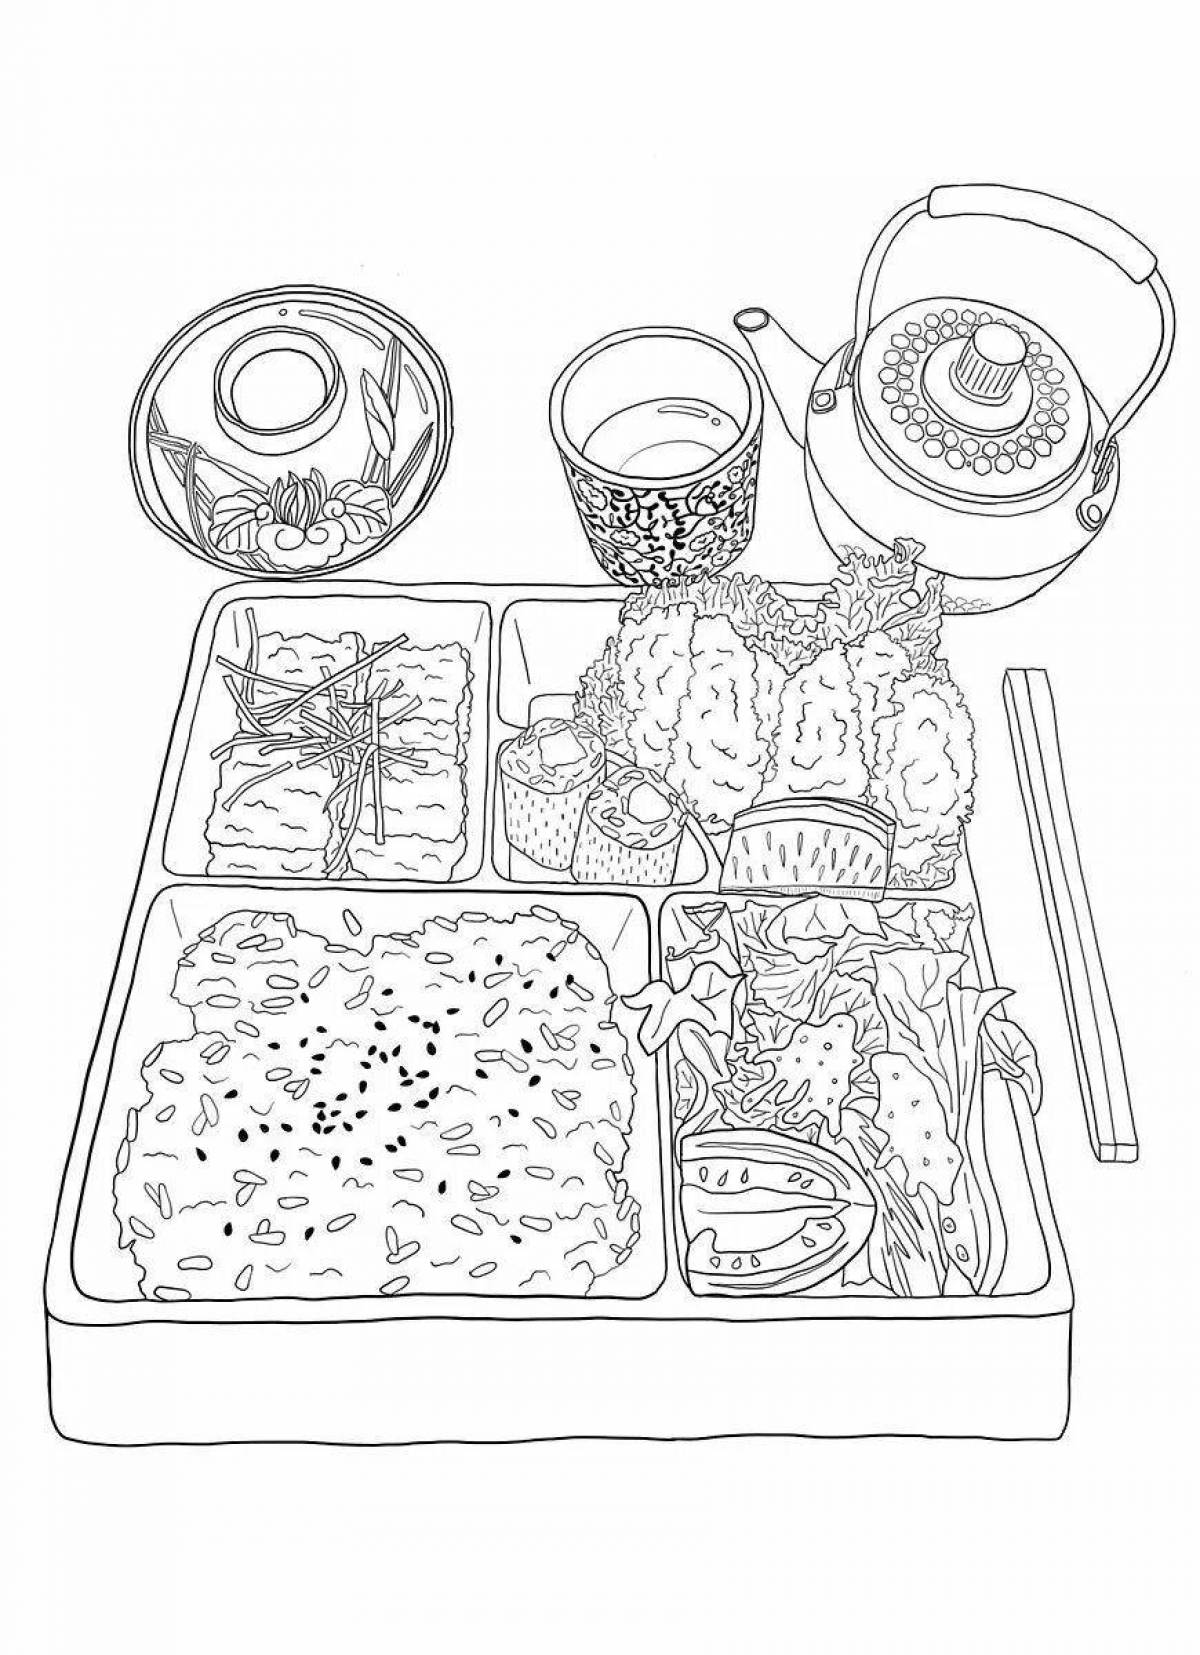 Attractive dish for coloring